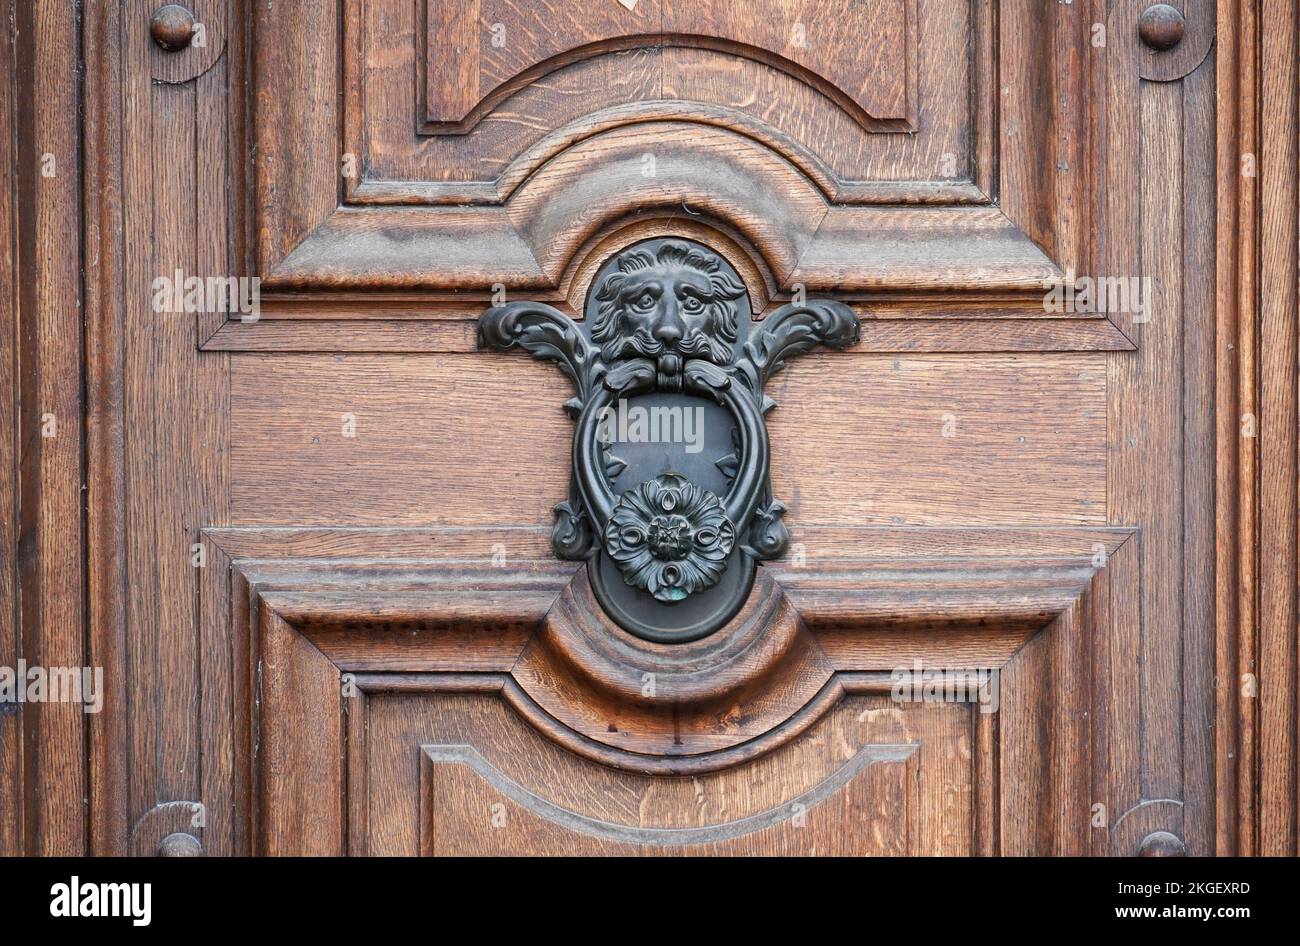 Old metal door knocker with decorations and a lion's head on a rustic wooden door. Stock Photo